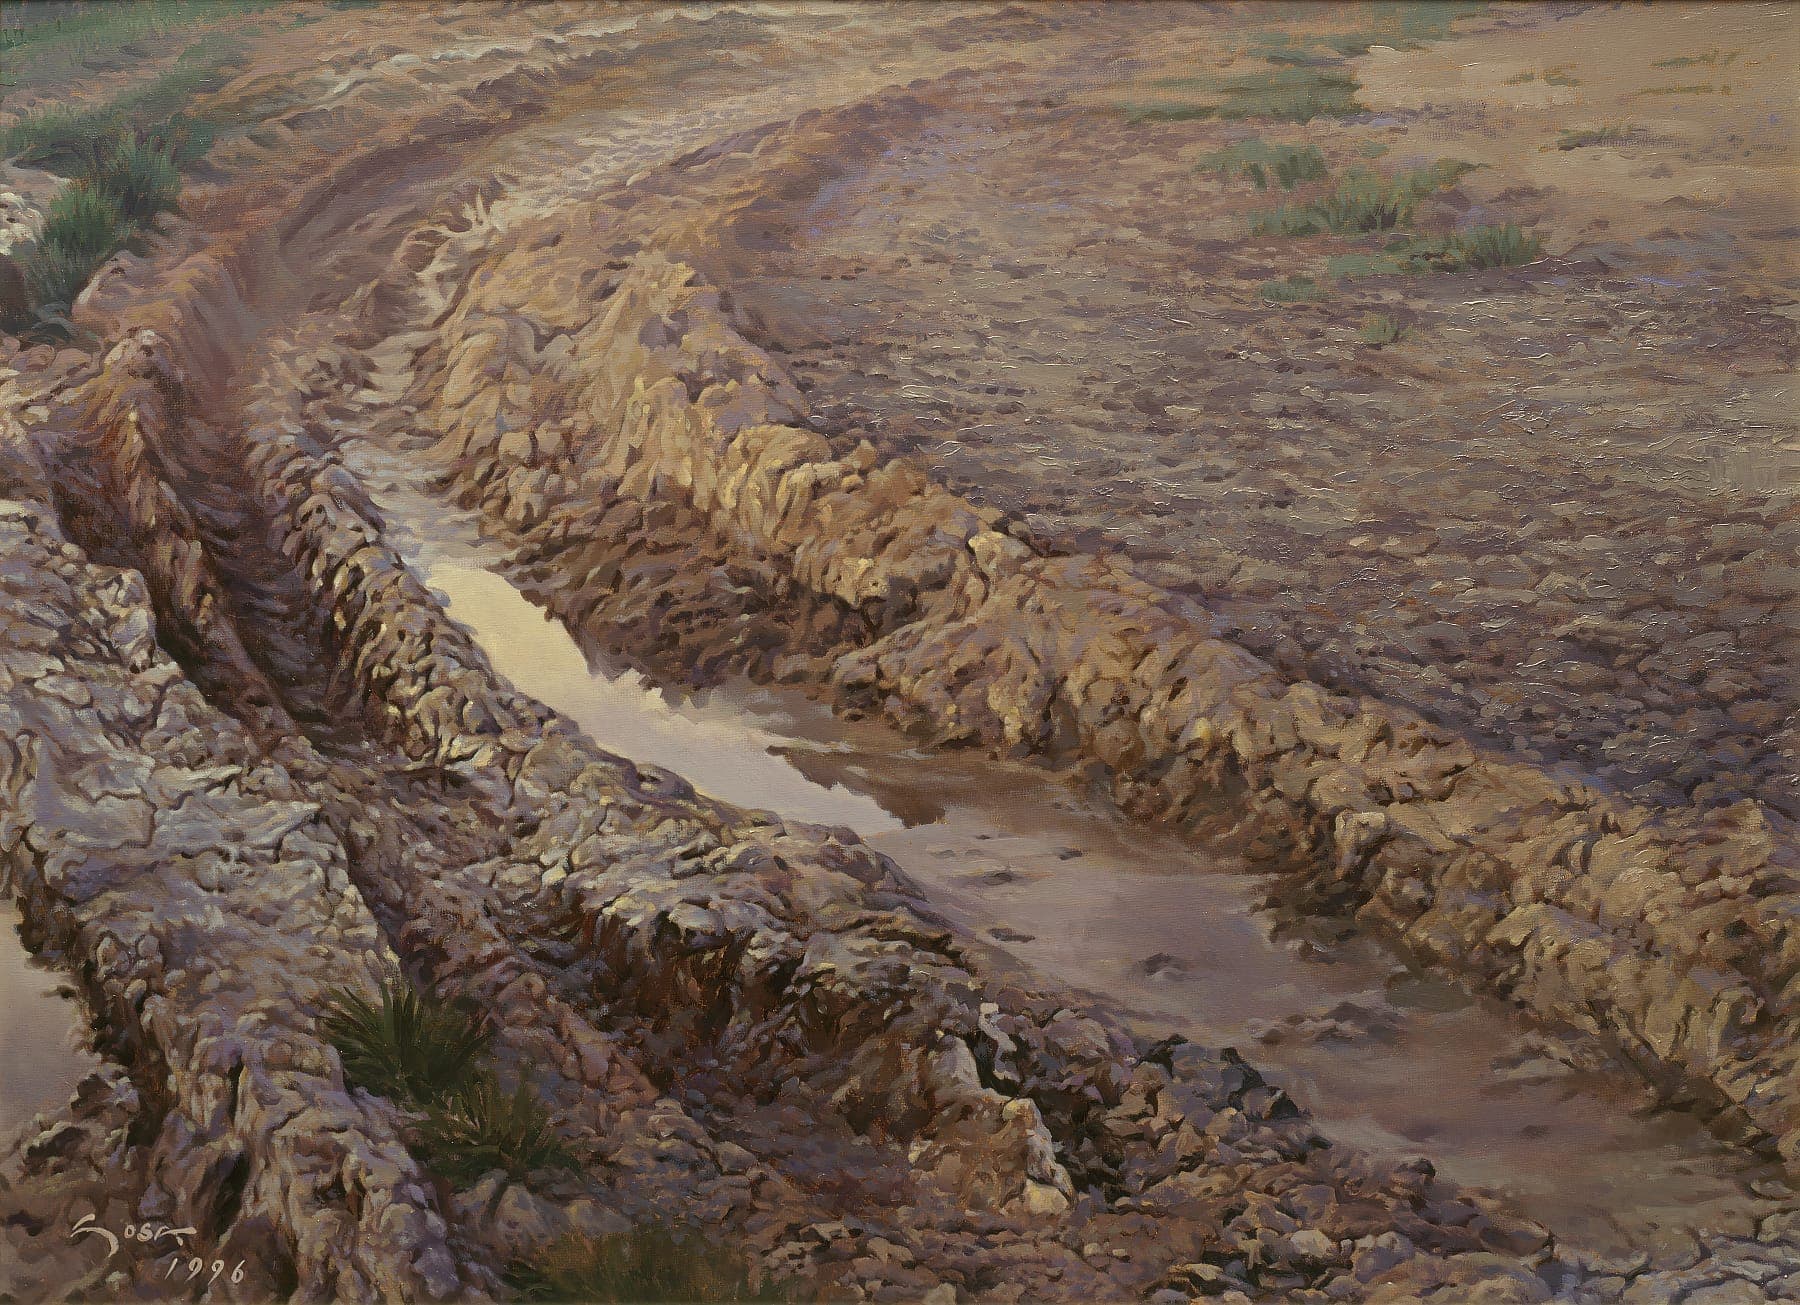 Landscape painting. Footprints in the mud on a path